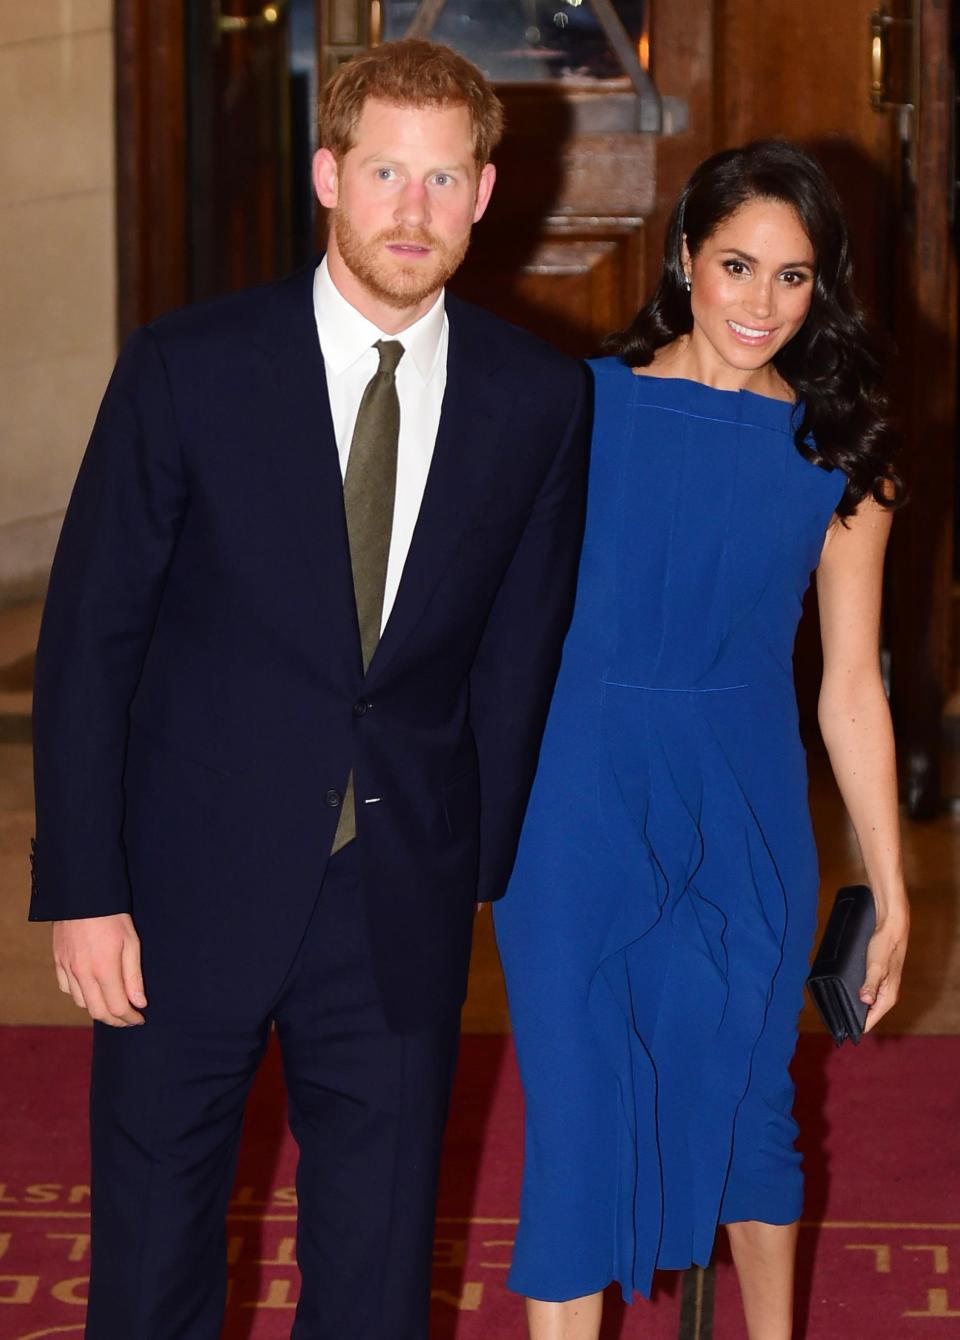 Meghan Markle wore a dress from Jason Wu's spring 2019 collection the night before he debuted it at New York Fashion Week. Talk about a good endorsement.